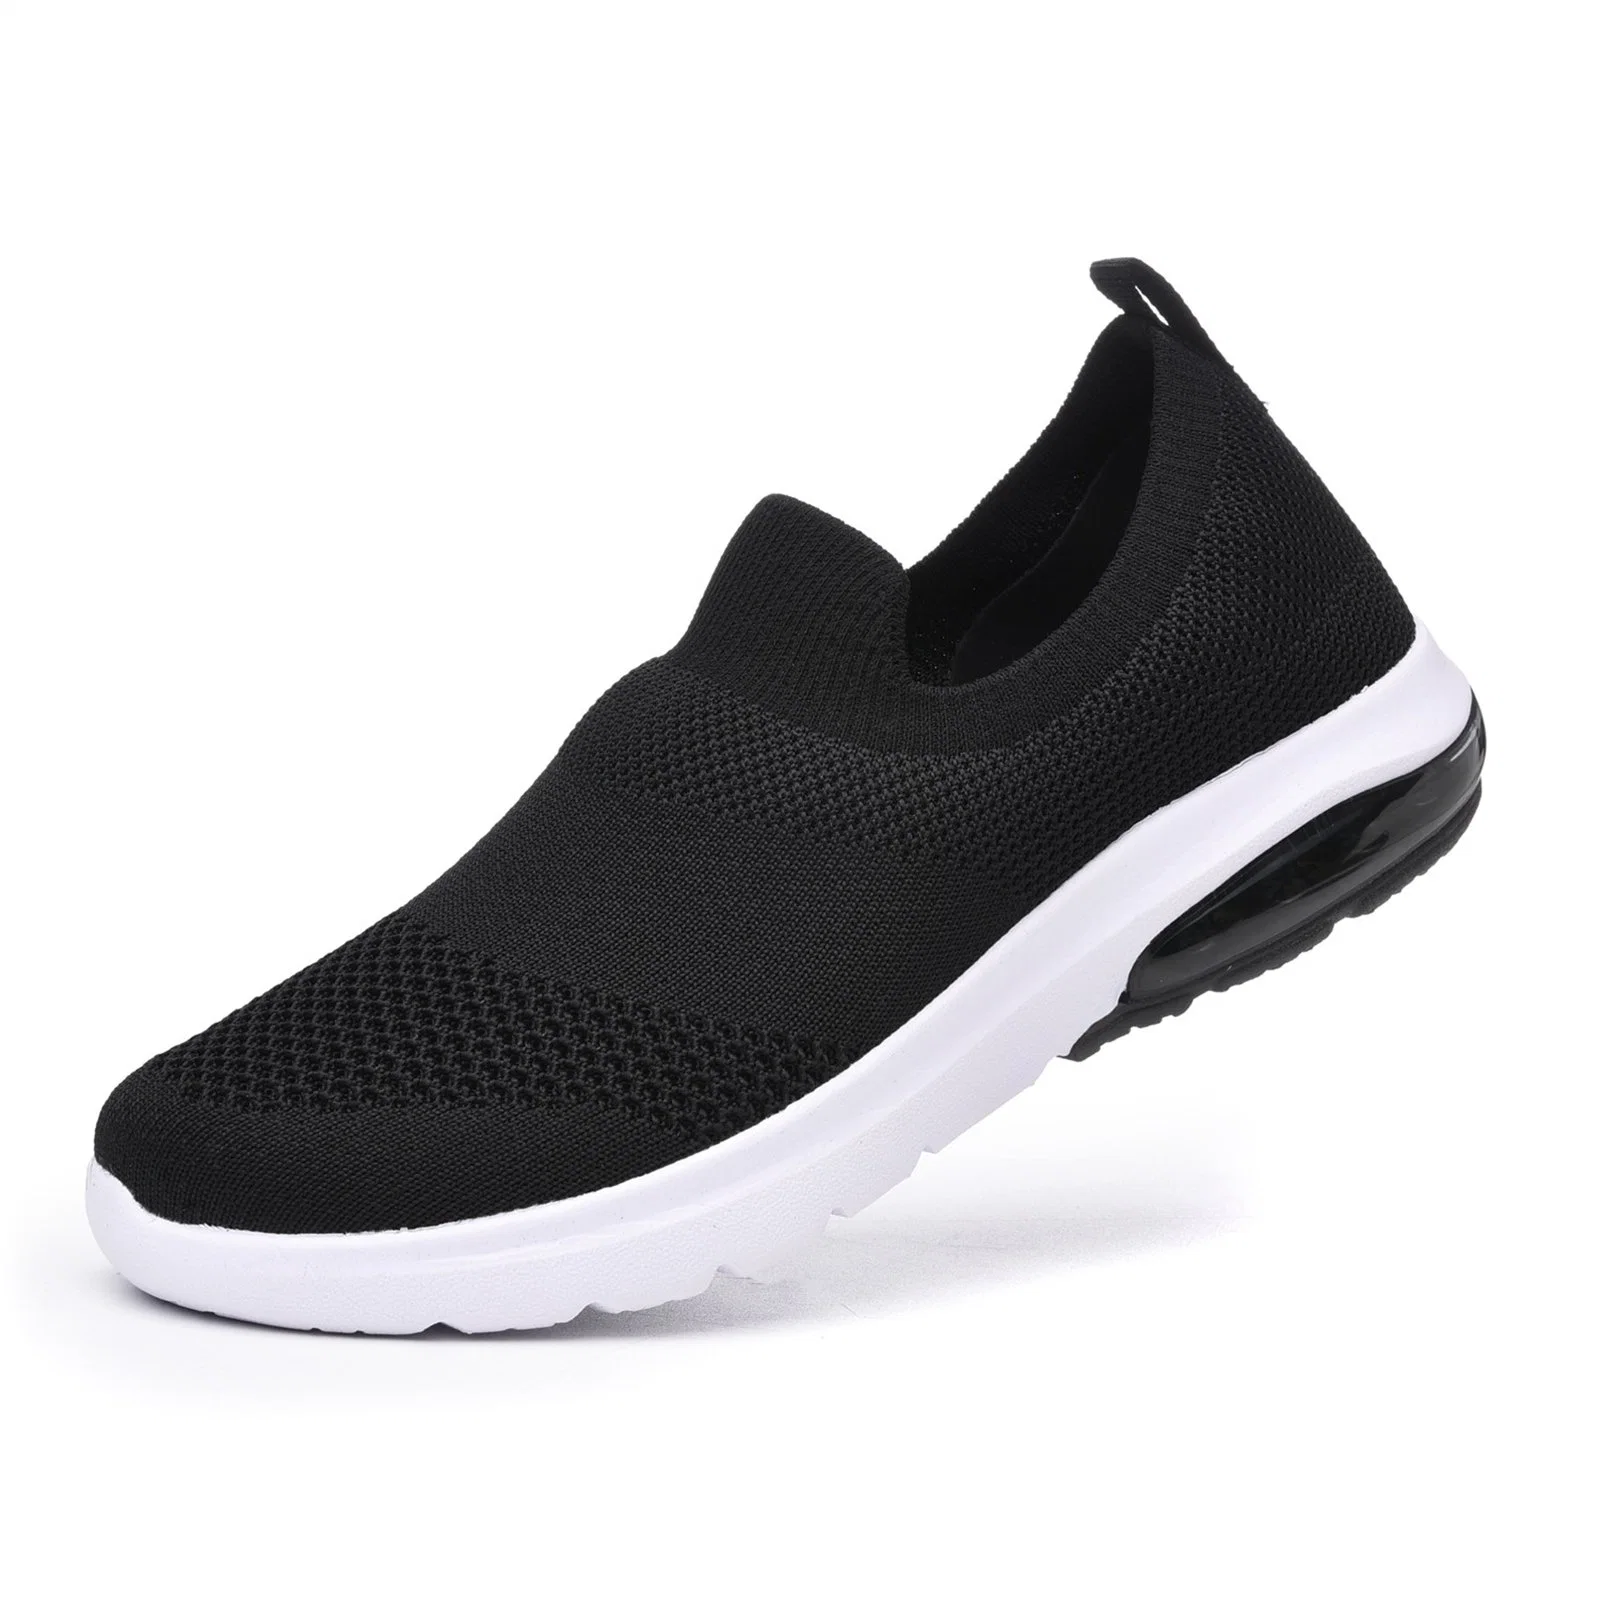 Flying Woven Sneakers Breathable Running Shoes Women Fashion Shoes OEM